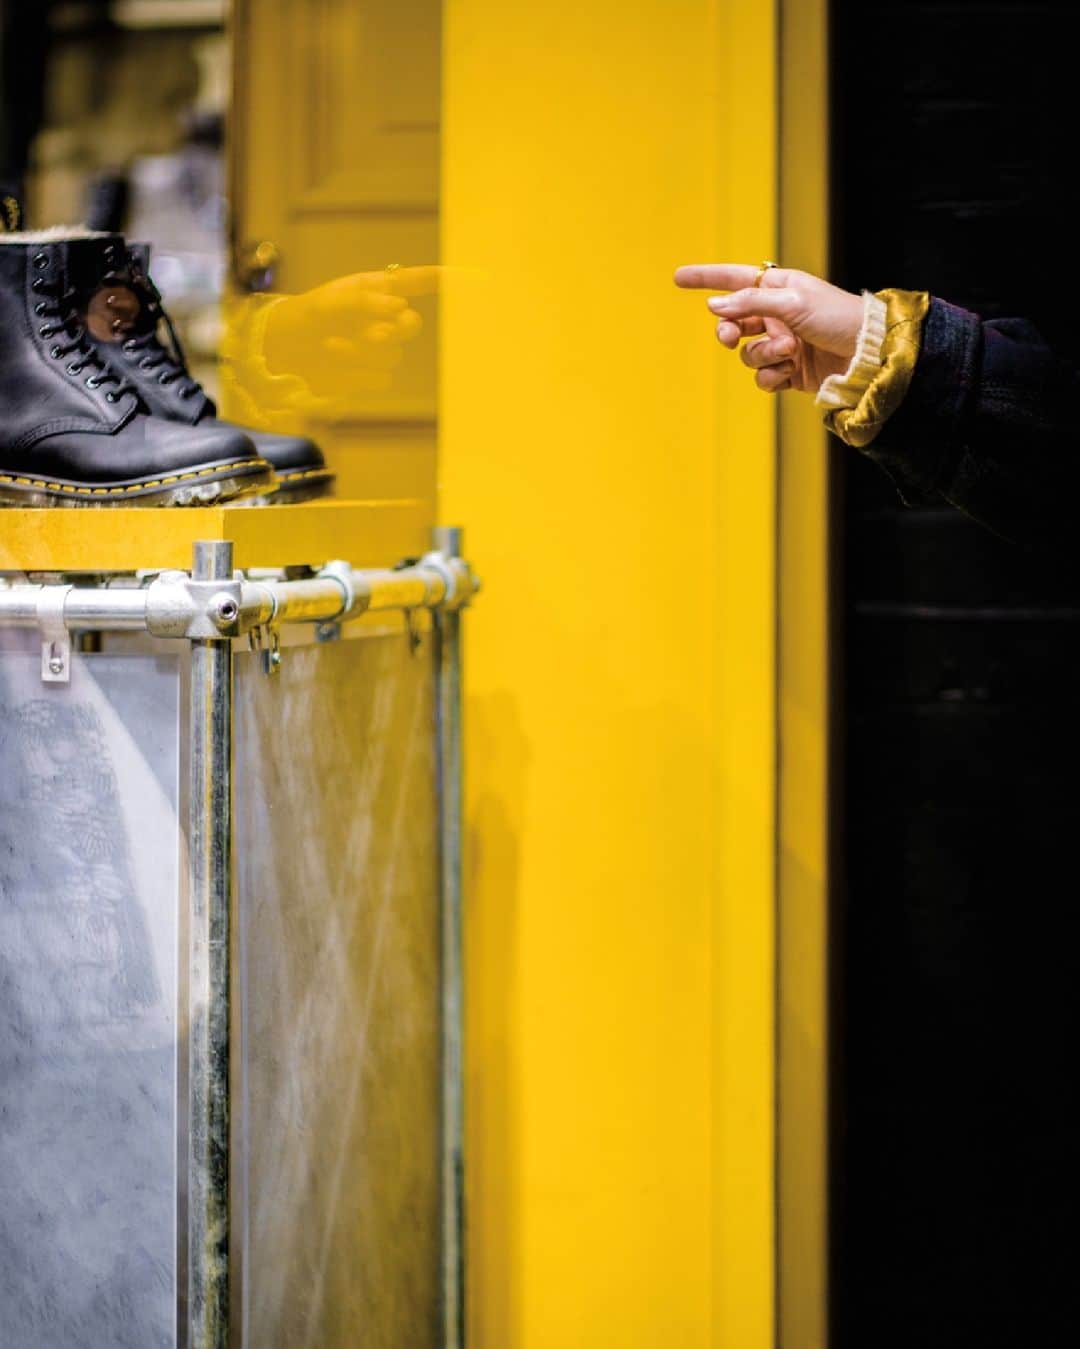 Fujifilm UKのインスタグラム：「Window shopper.  “This photo was shot on a winter evening and I was initially drawn to the beautifully lit bright yellow shopfront. I was using the XF56mmF1.2 and caught this shopper’s hand pointing at the pair of boots. I like how we only see the details and have to imagine the rest of the story for ourselves.”   📷: @shorty.shots  #FUJIFILMXT3 XF56mmF1.2 R f/1.2, ISO 160, 1/220 sec. 🎞 Pro Neg Hi V2」